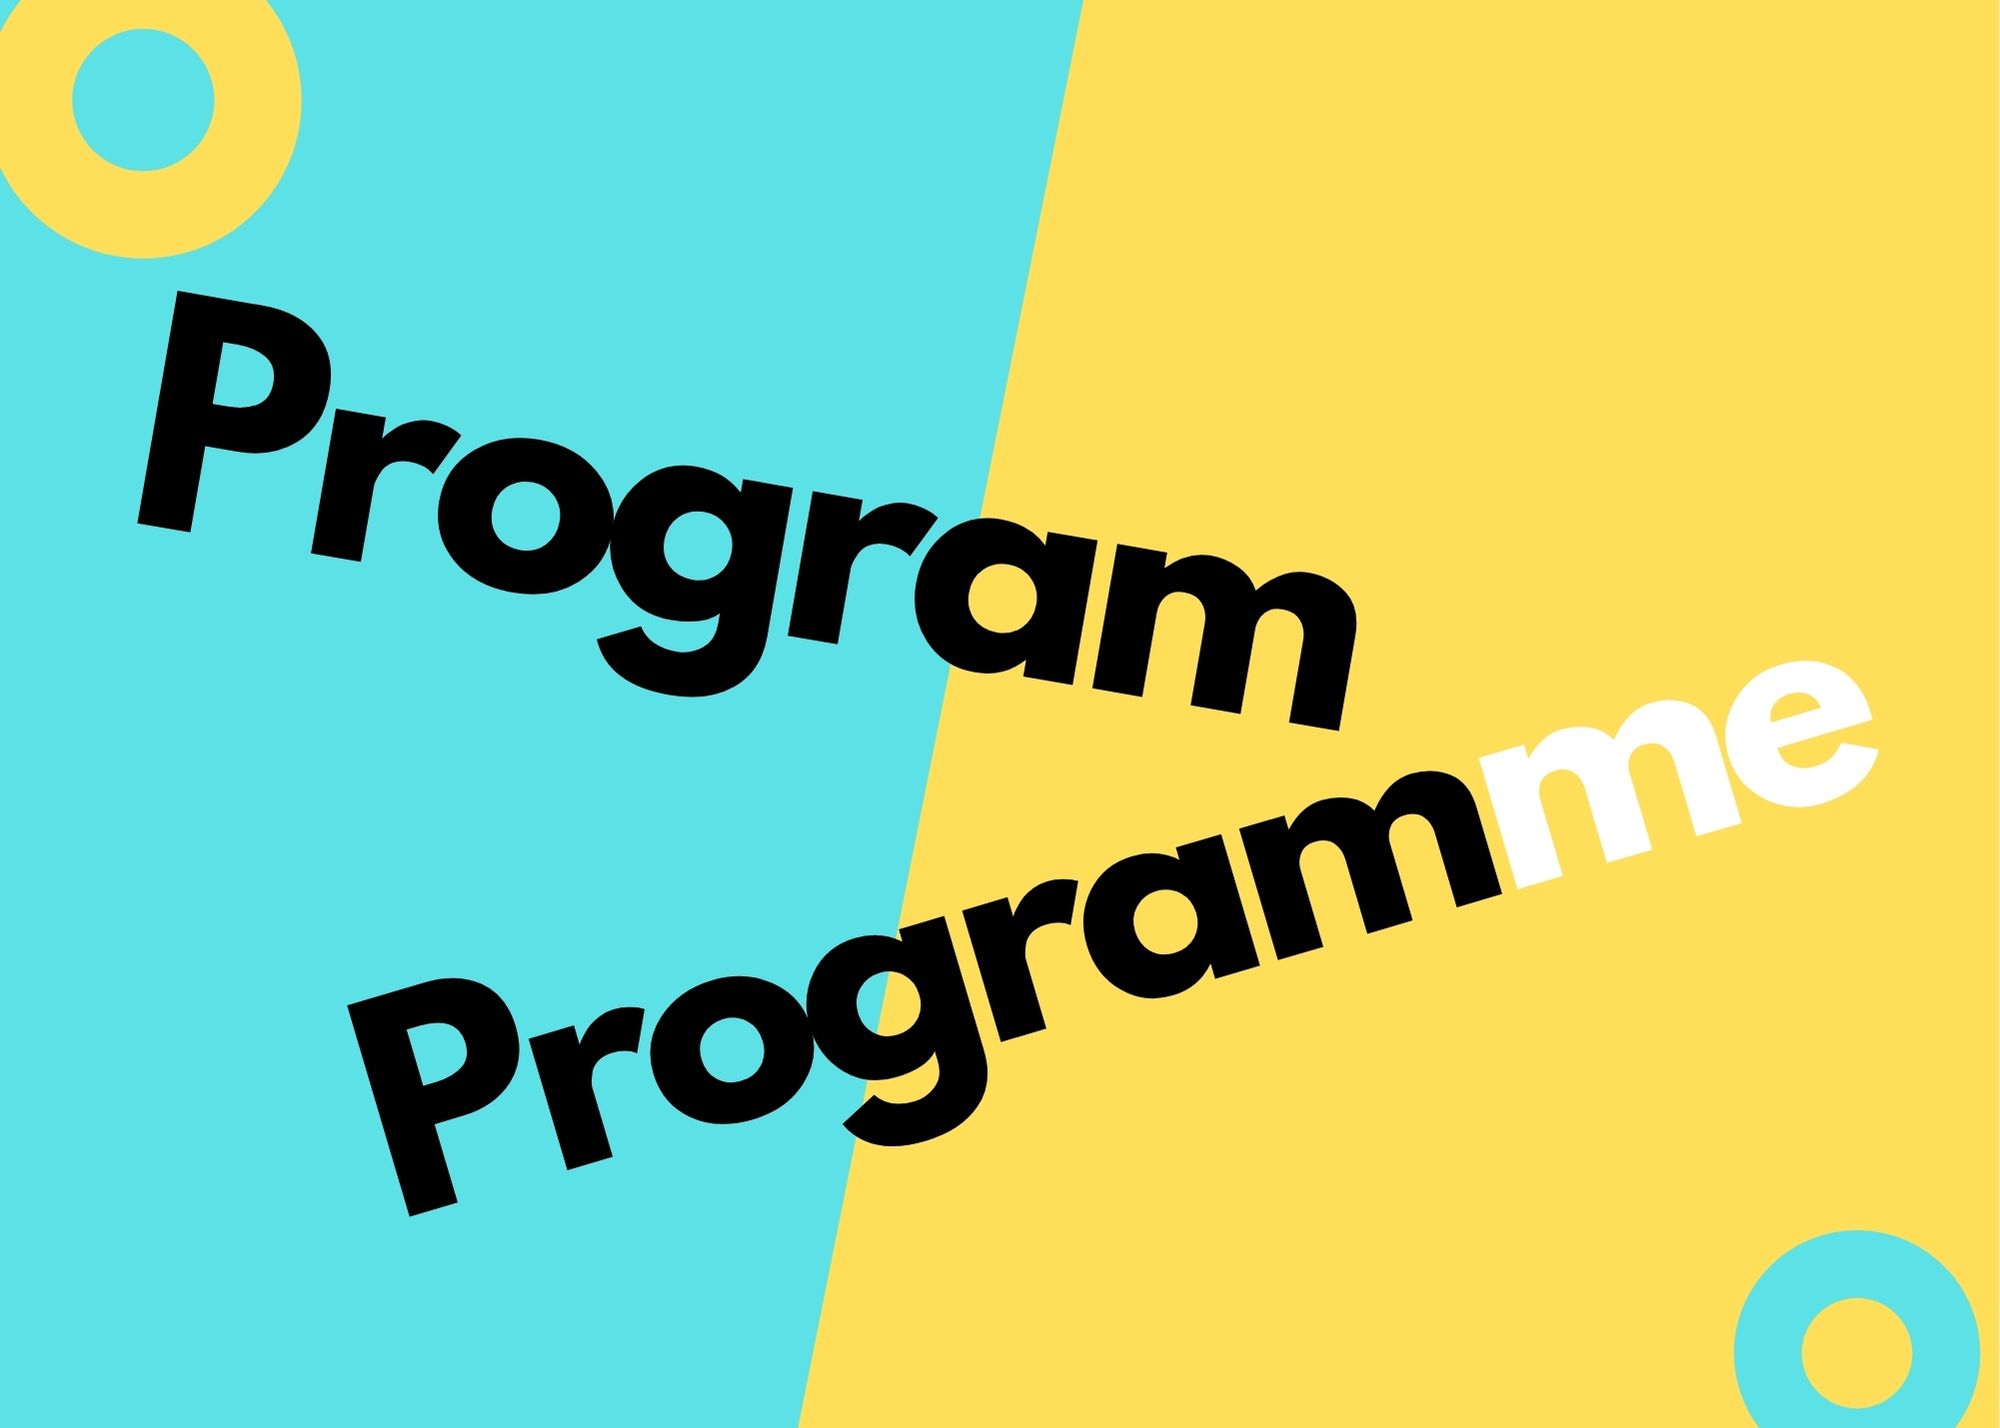 Words Program and Programme